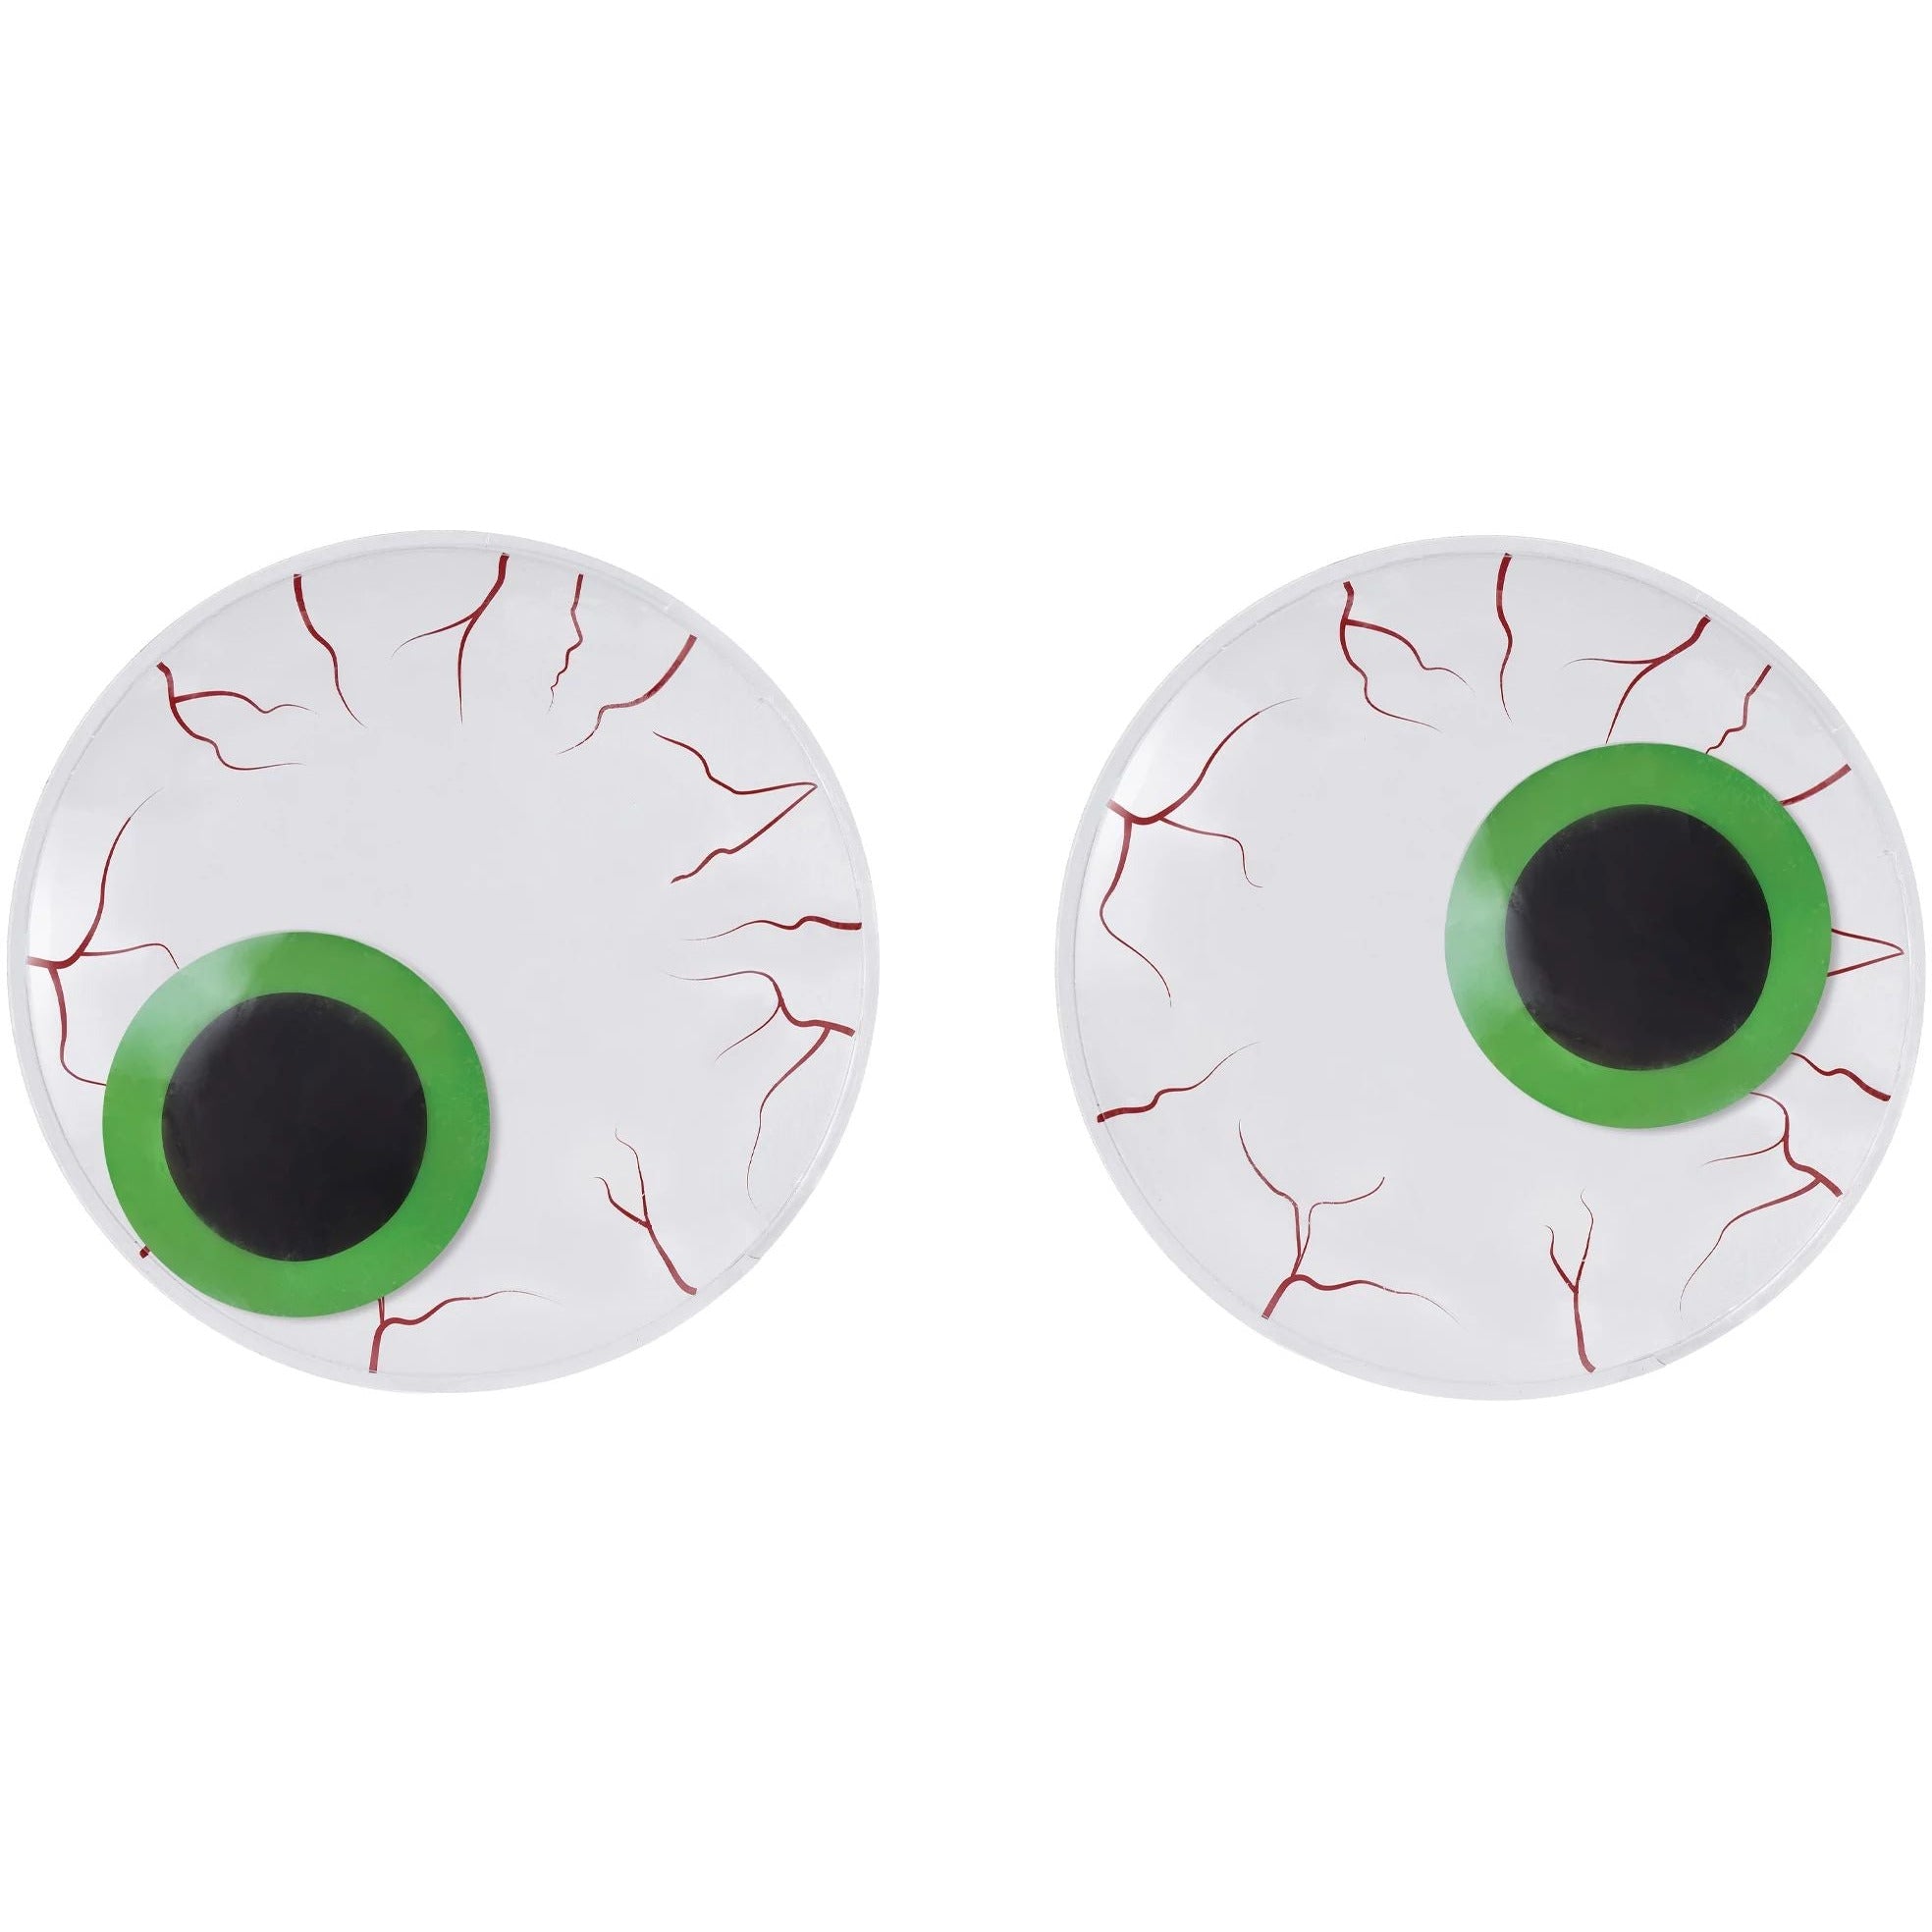 Amscan HOLIDAY: HALLOWEEN Oversized Spooky Googly Eyes